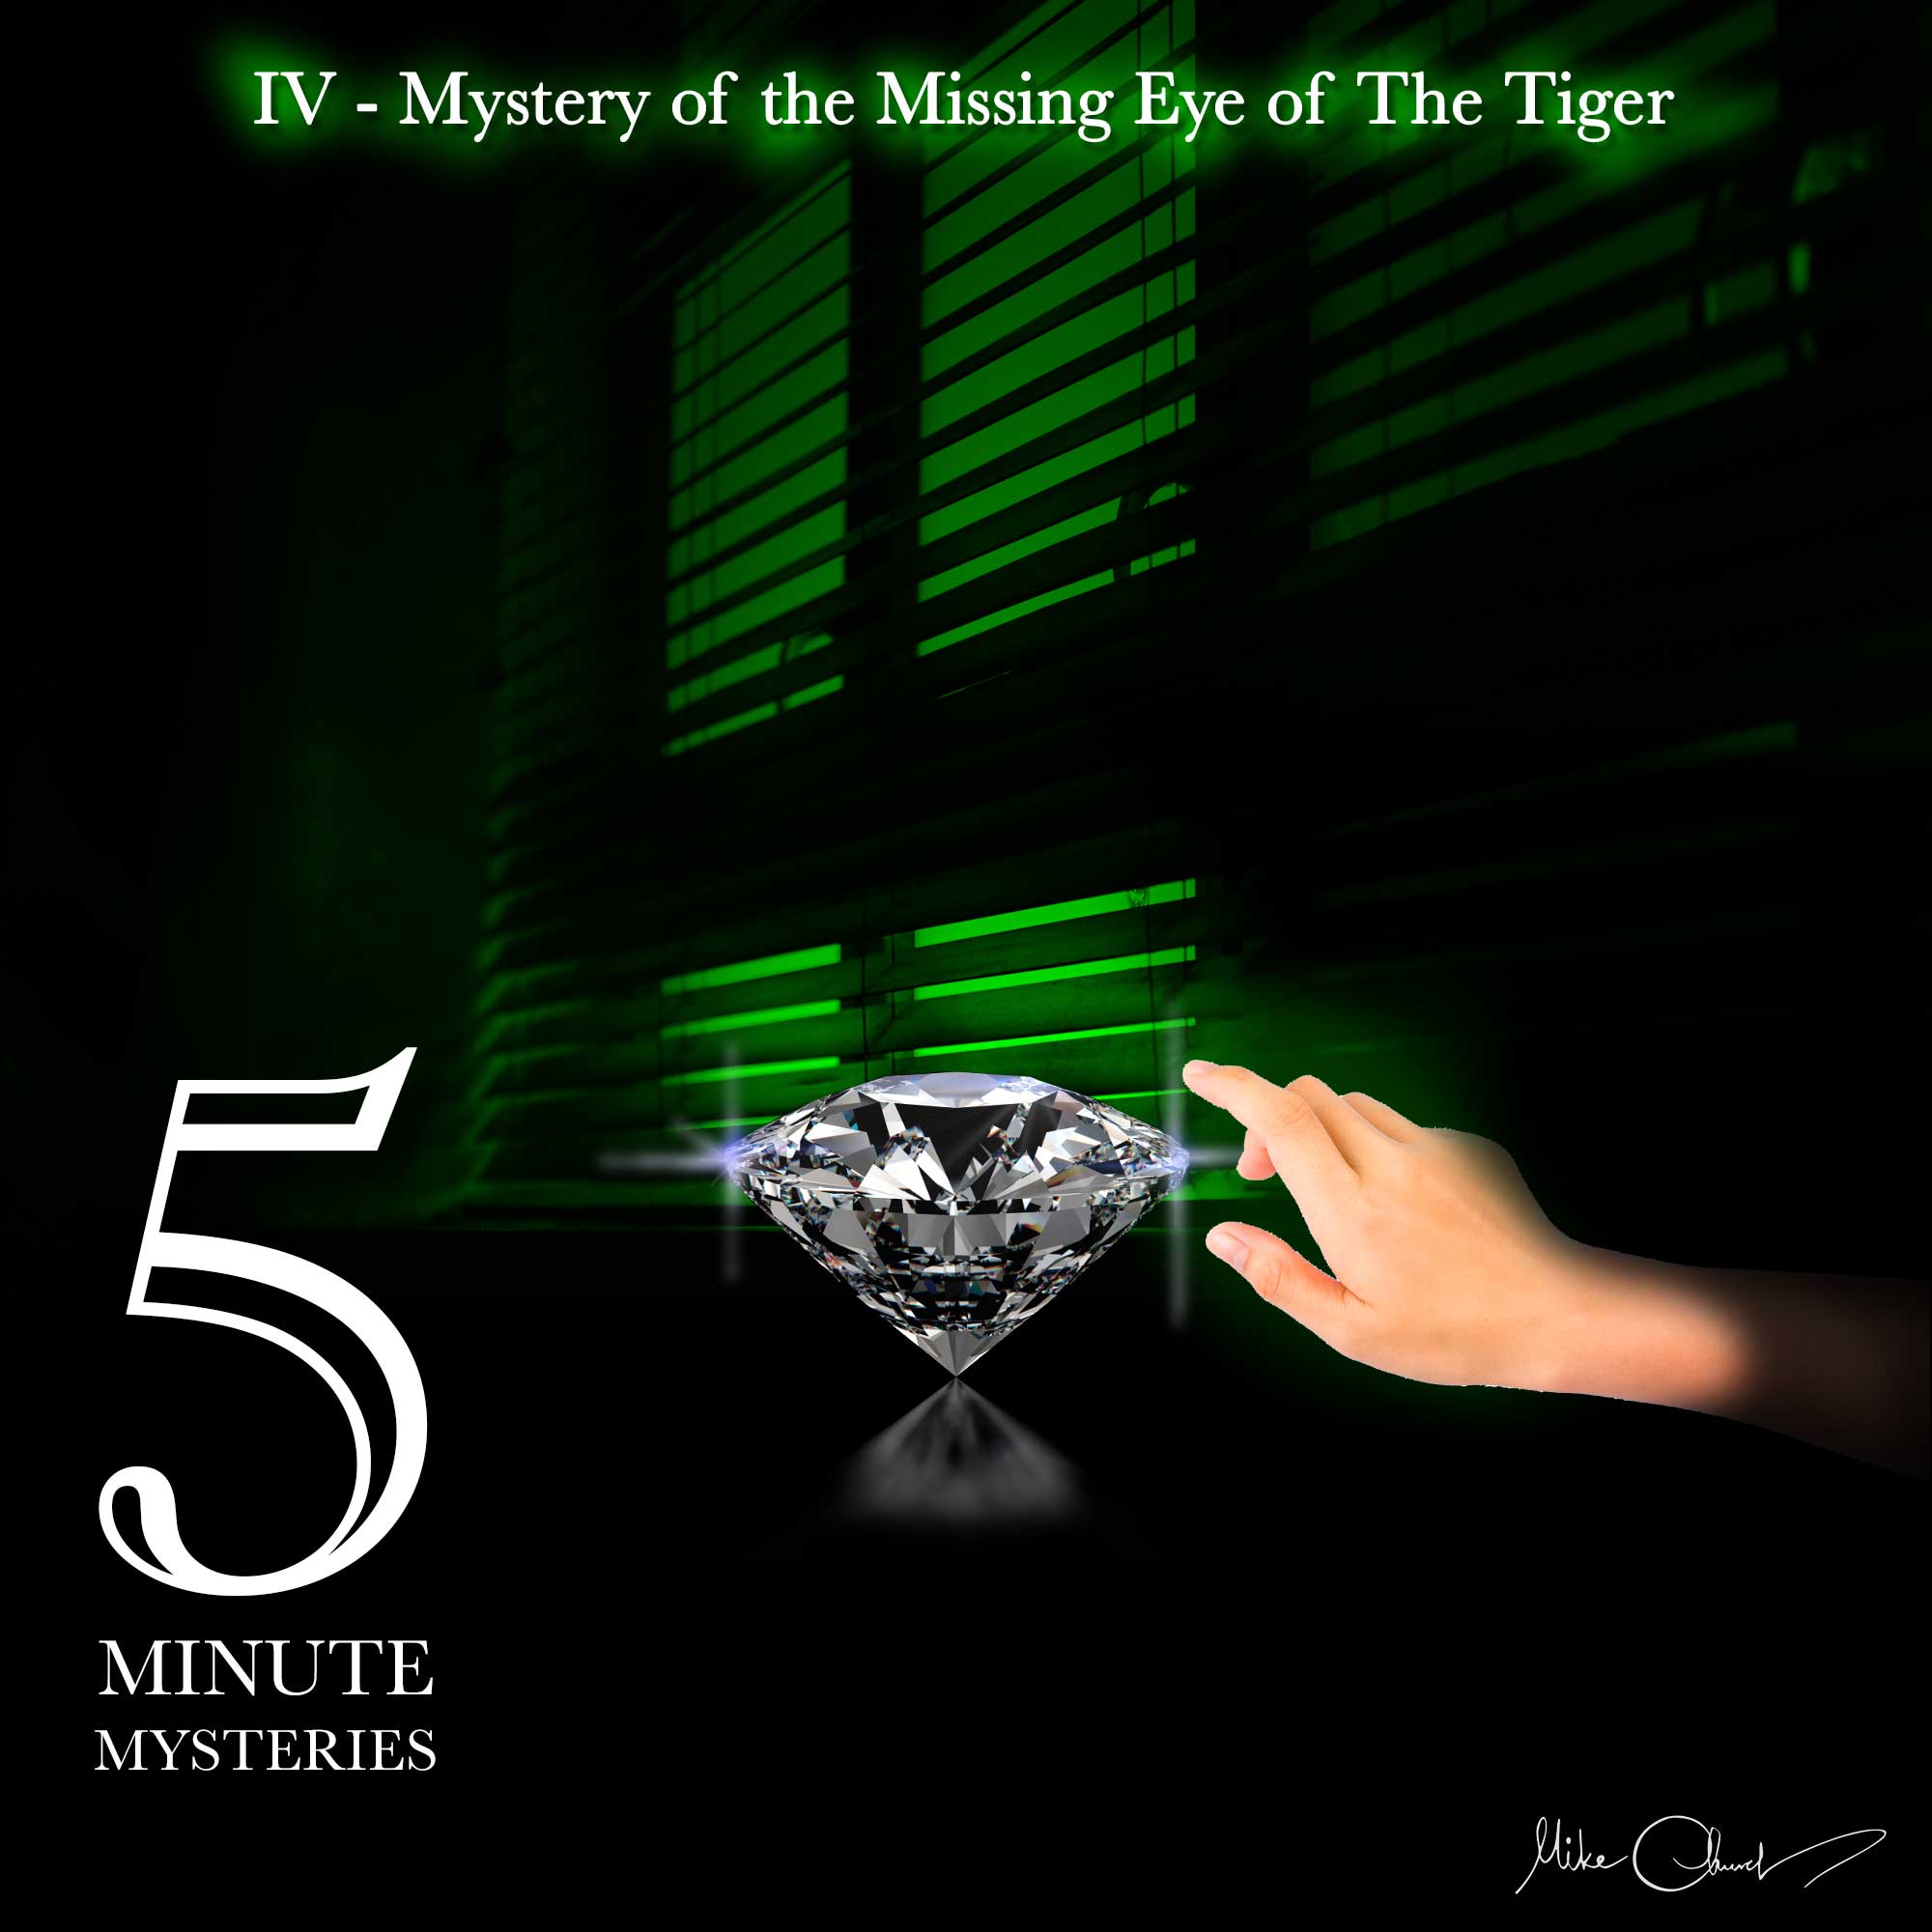 5-minute-mysteries-mystery-of-the-missing-eye-of-the-tiger